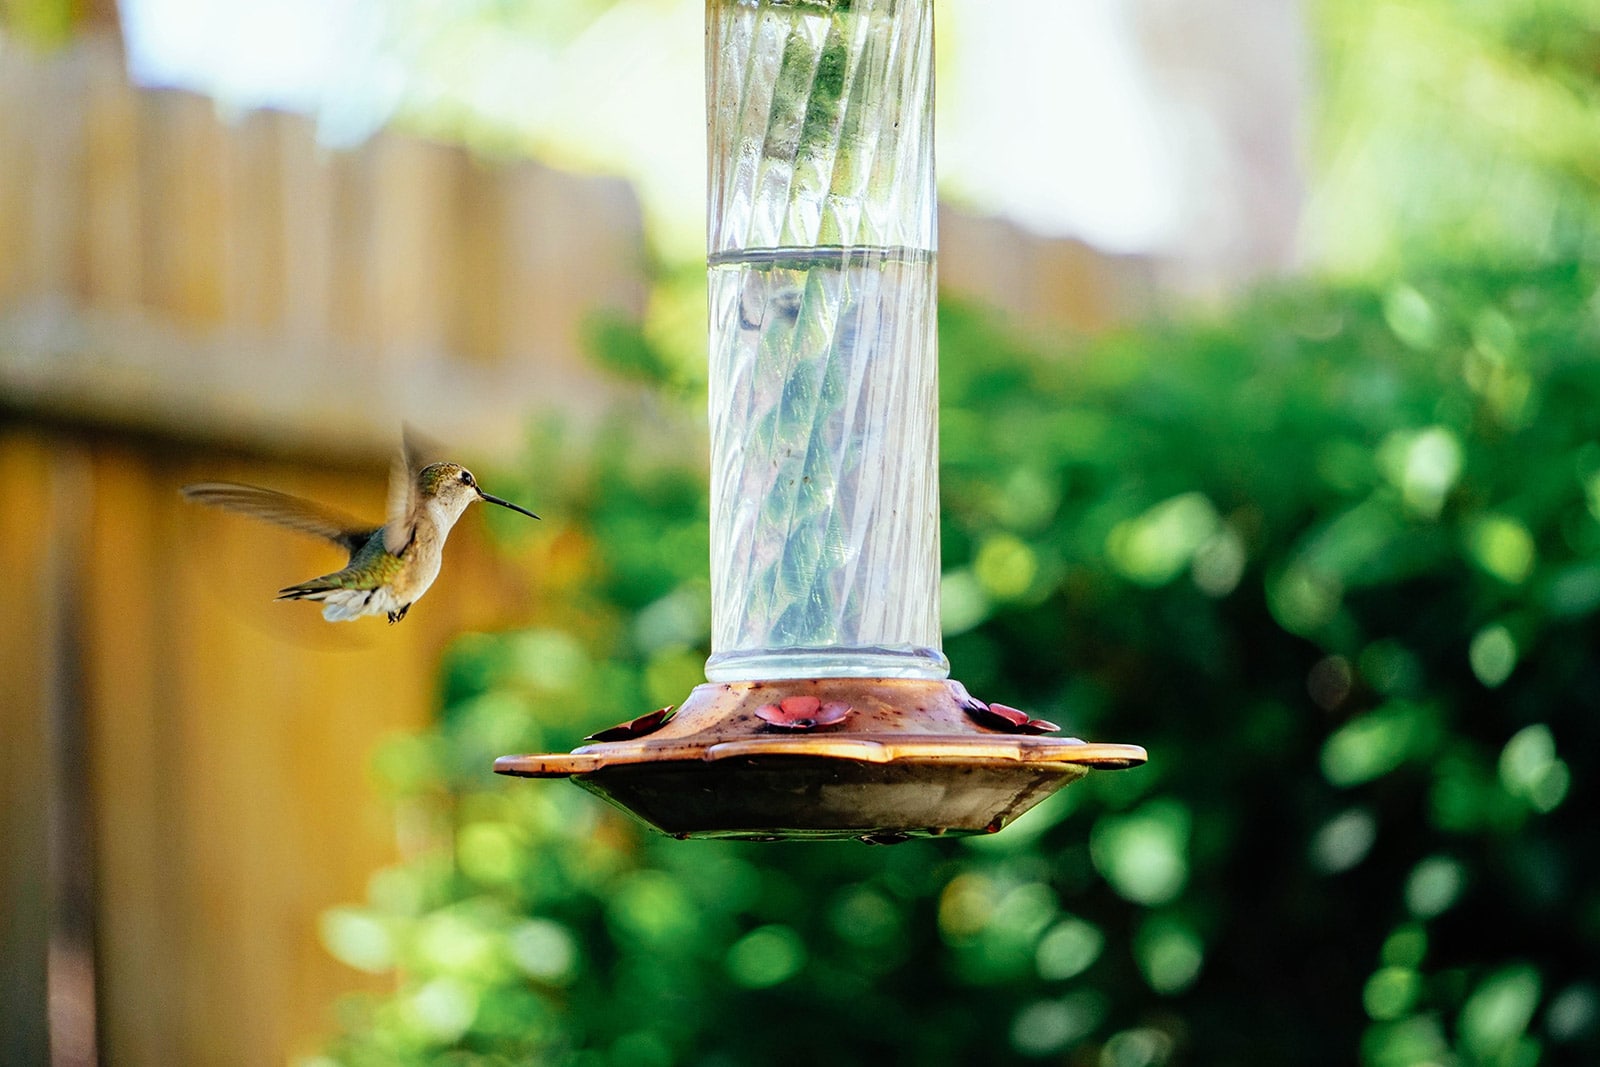 Hummingbird flying to a hanging feeder in the garden